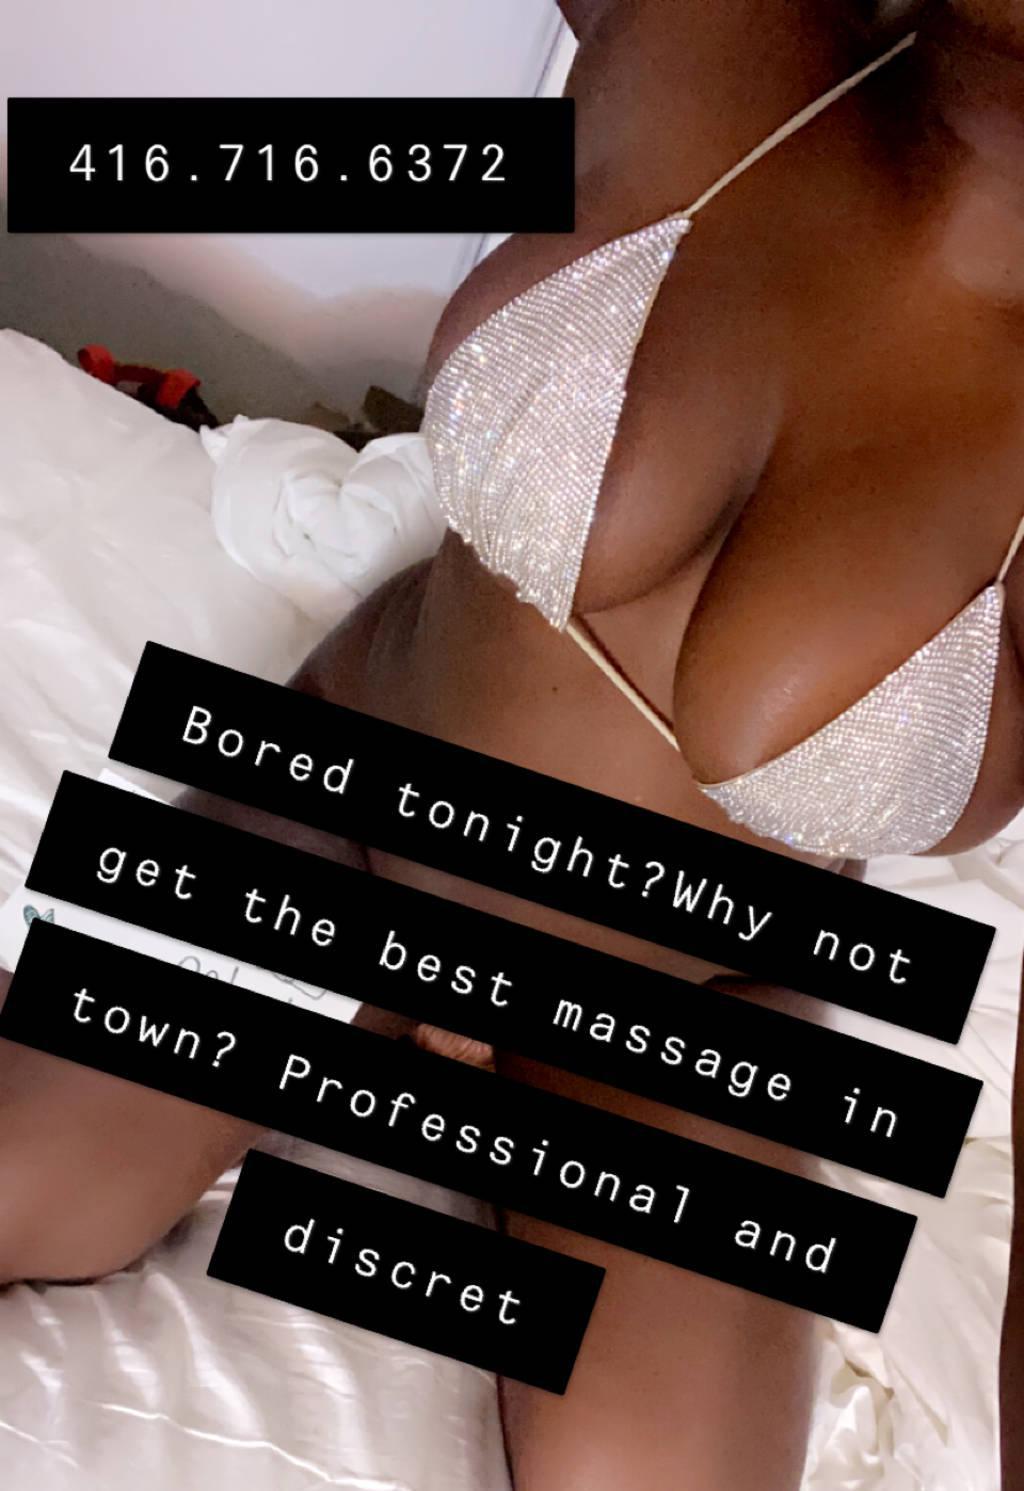 YOUR FAV EBONY PLAYMATE IS BACK, DONT BE SHY BOOK ME NOW